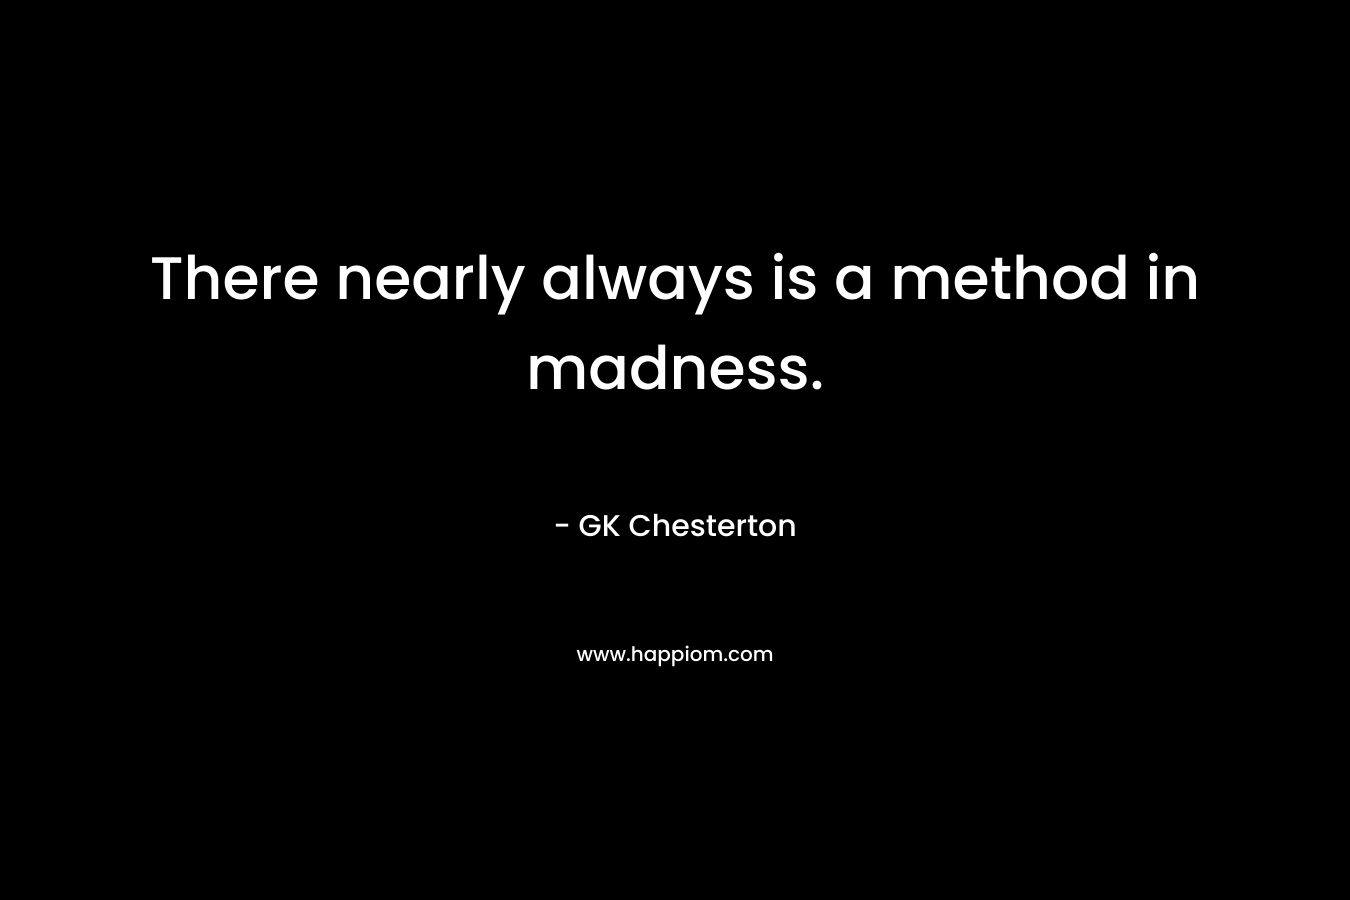 There nearly always is a method in madness. – GK Chesterton